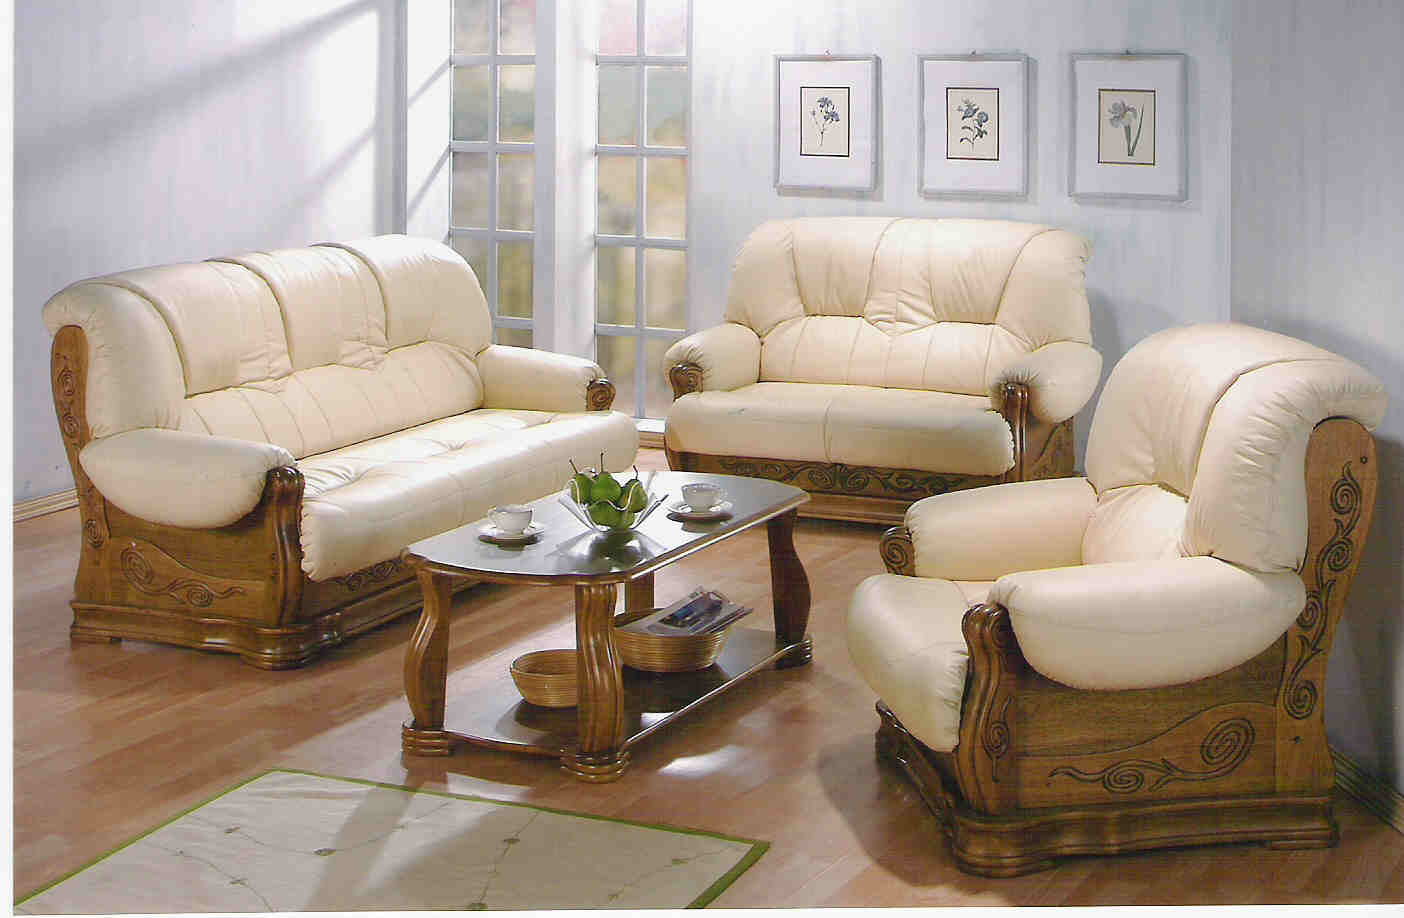 Sofa set Made of shishum wood With Top glass table made of 